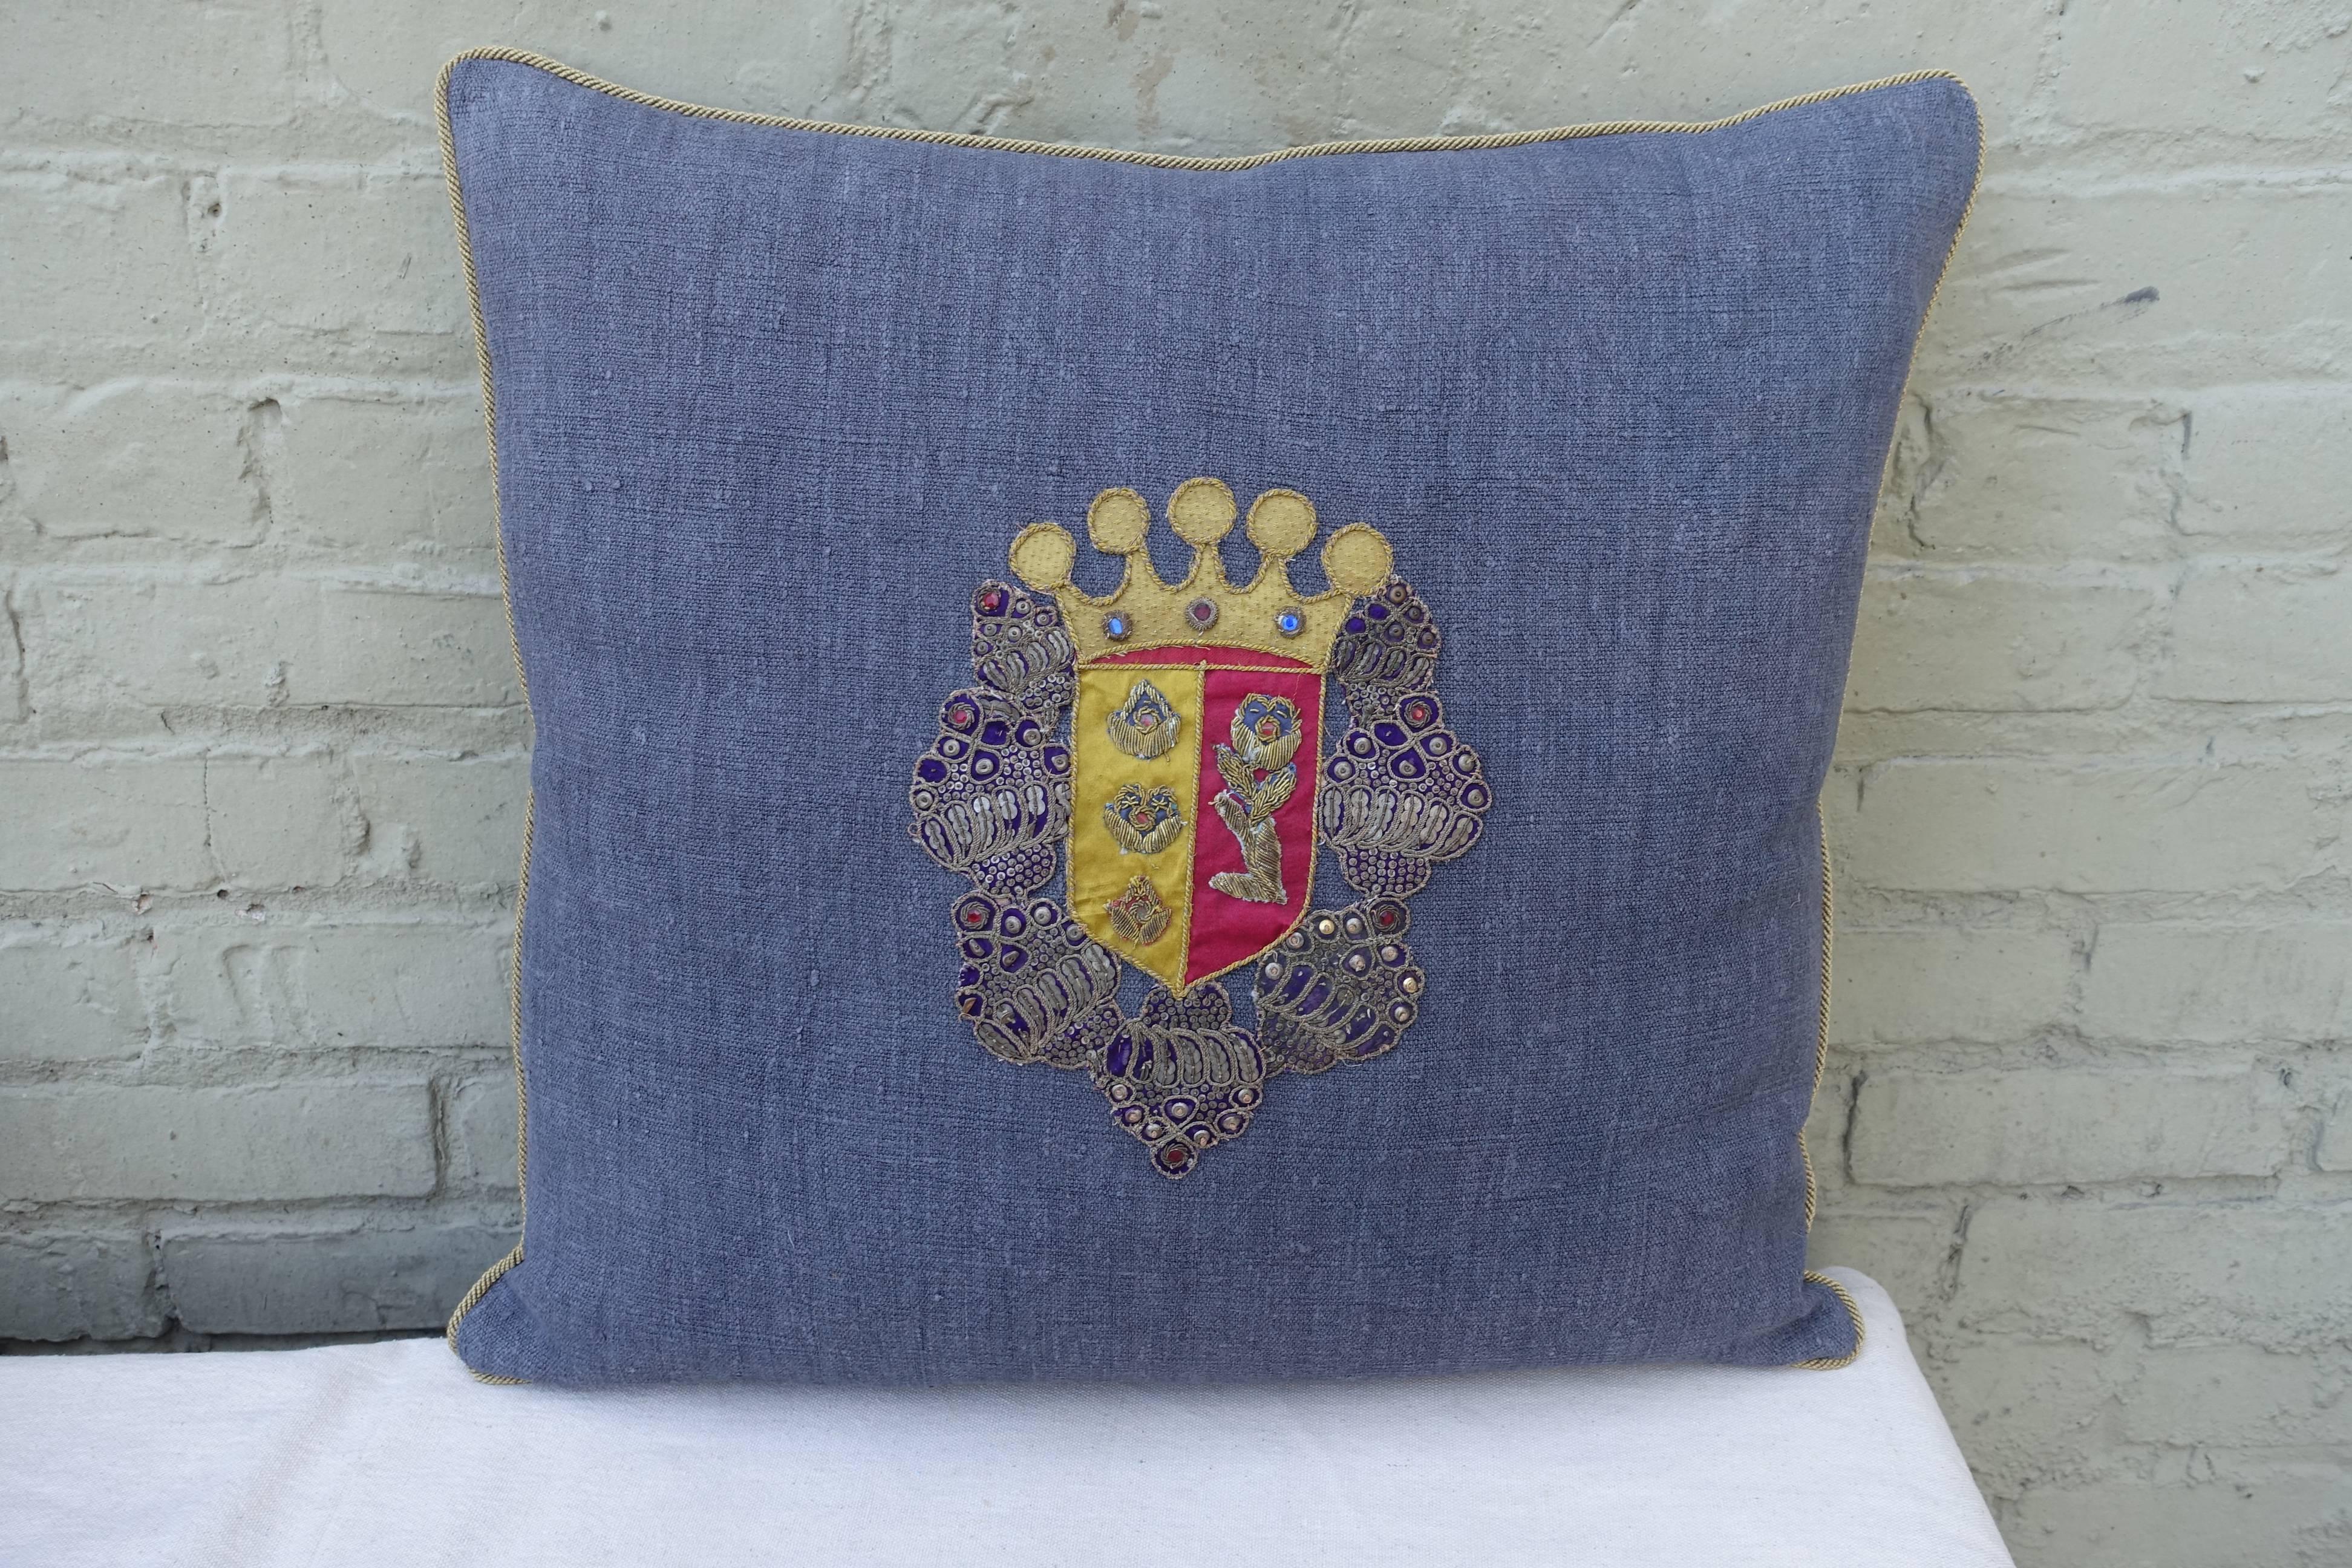 Pair of 19th century metallic and silk coat of arms applique´d on antique home spun linen and finished with metallic gold cording around the edges. Down inserts.